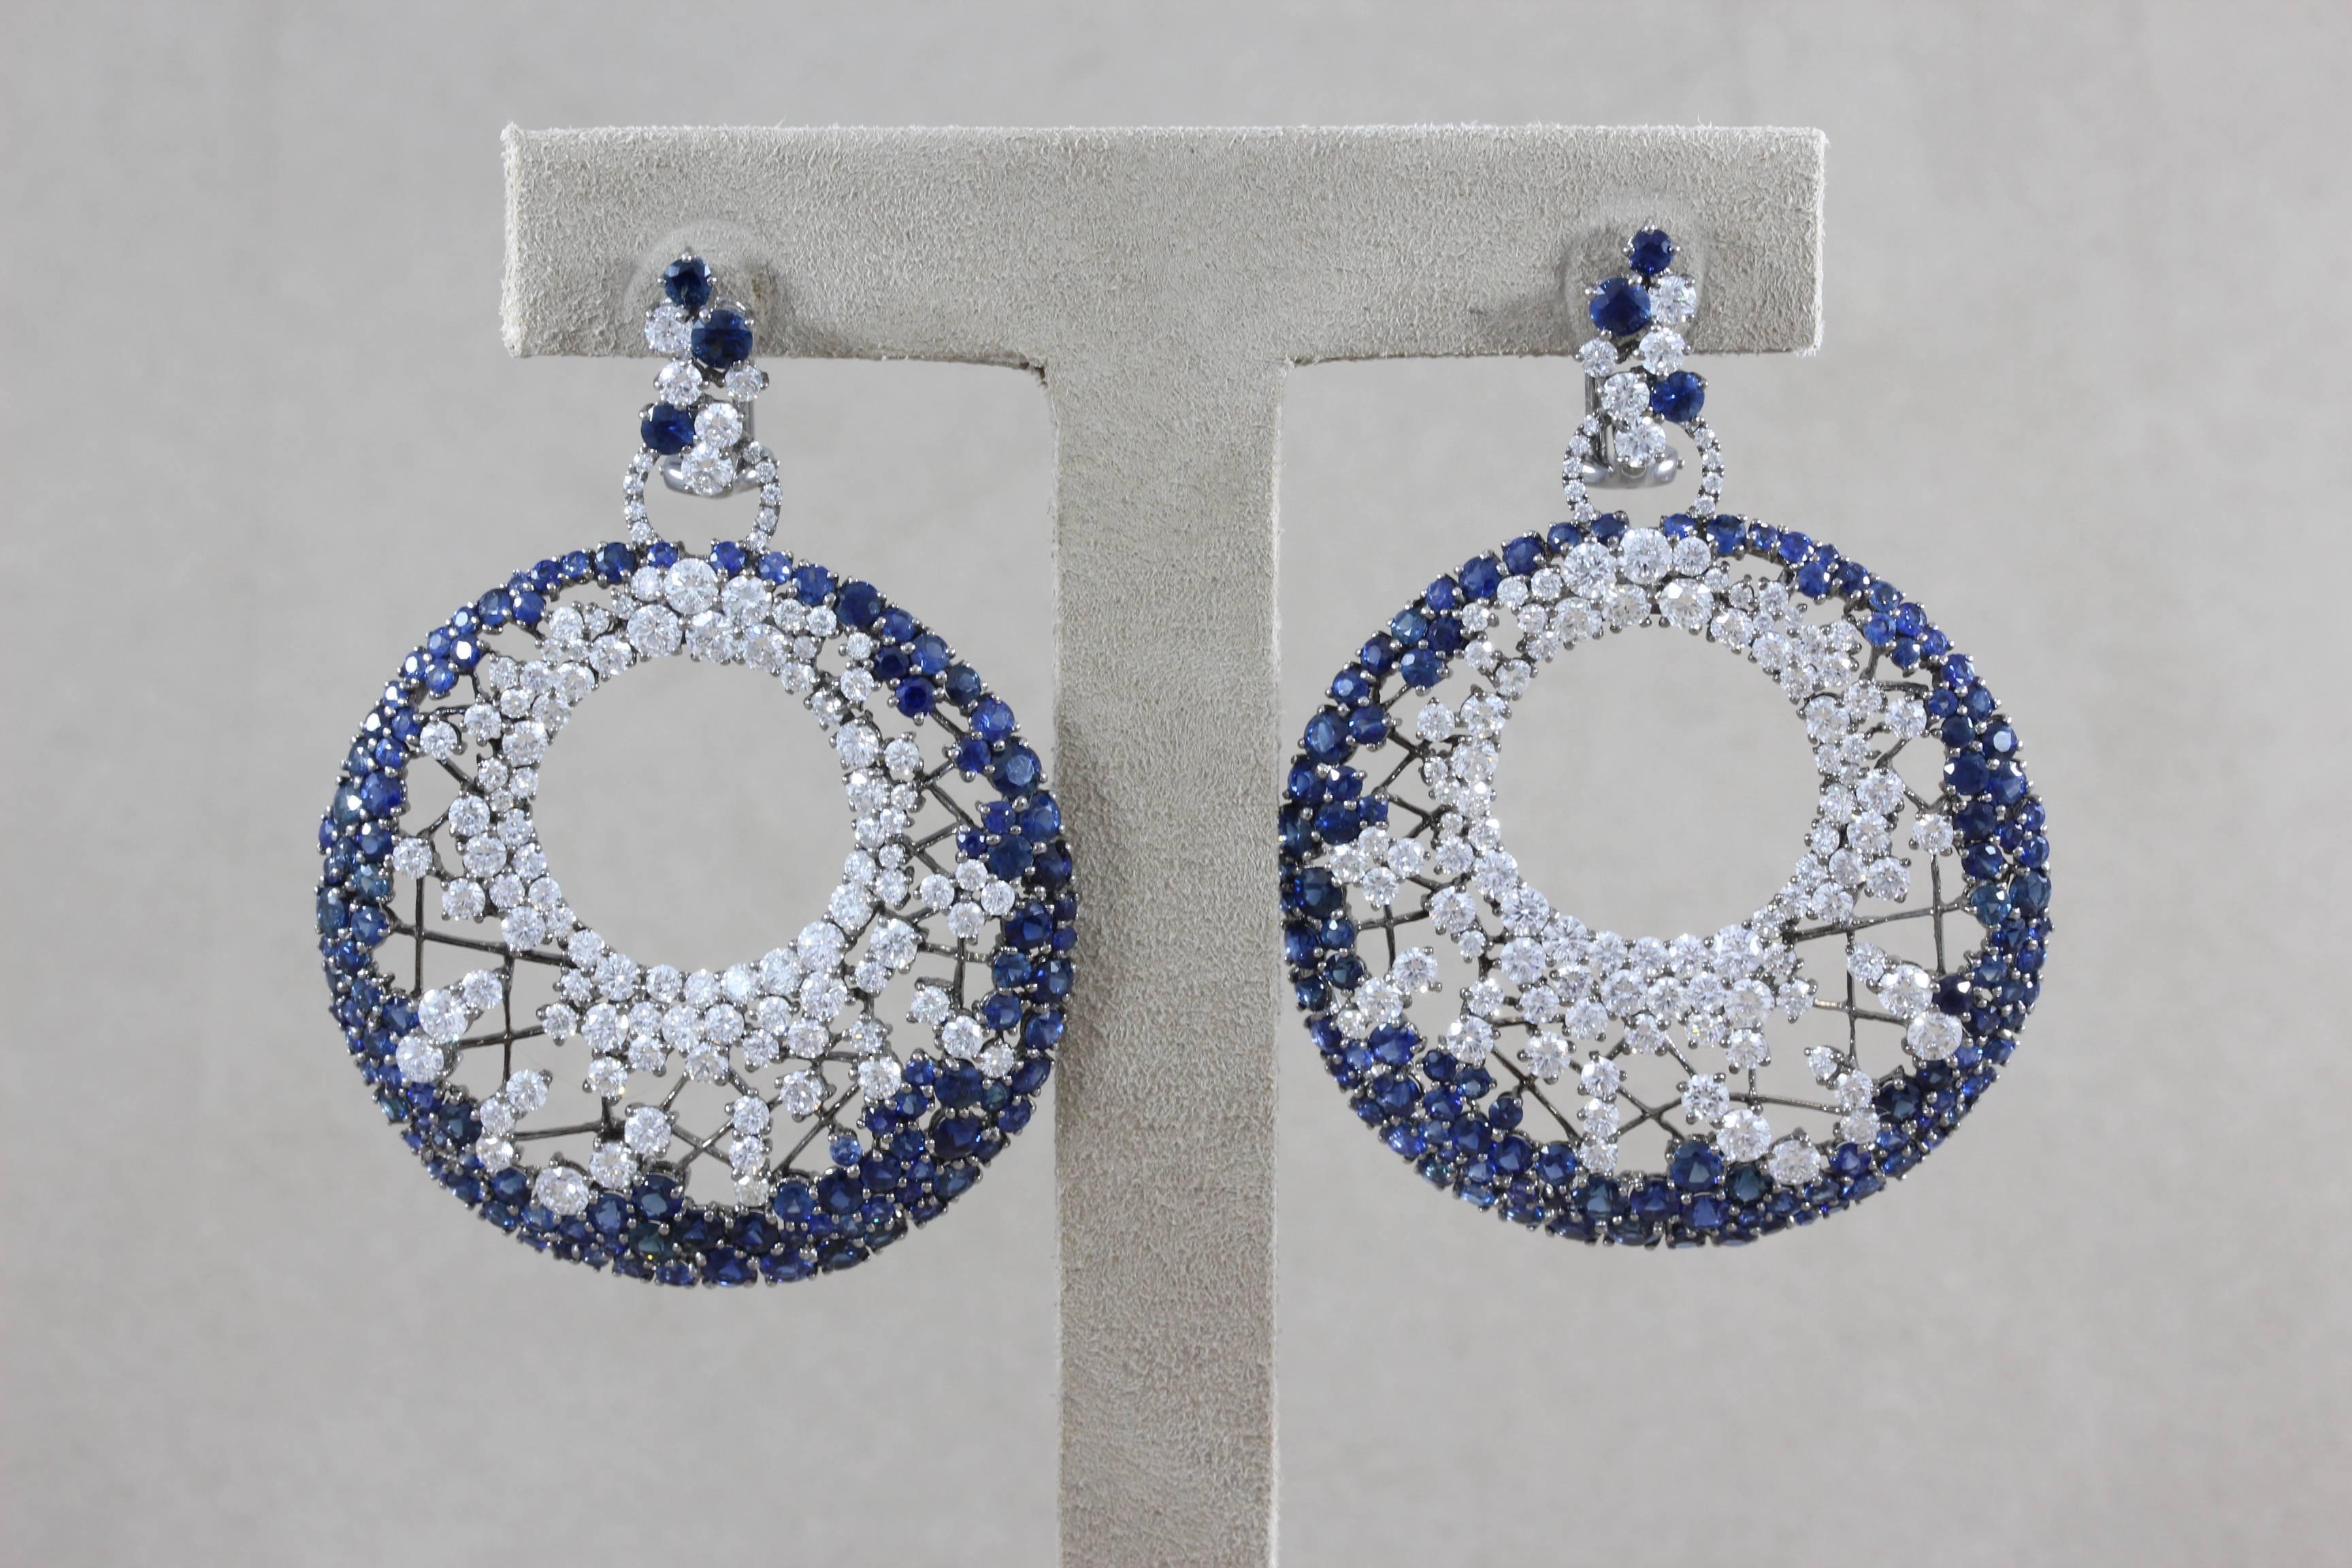 A spectacularly designed pair of earrings featuring top quality round cut diamonds and blue sapphires which are set in 18K black gold. The earrings feature 9.80 carats of VS quality round cut diamonds and 12.76 carats of beautiful vivid blue